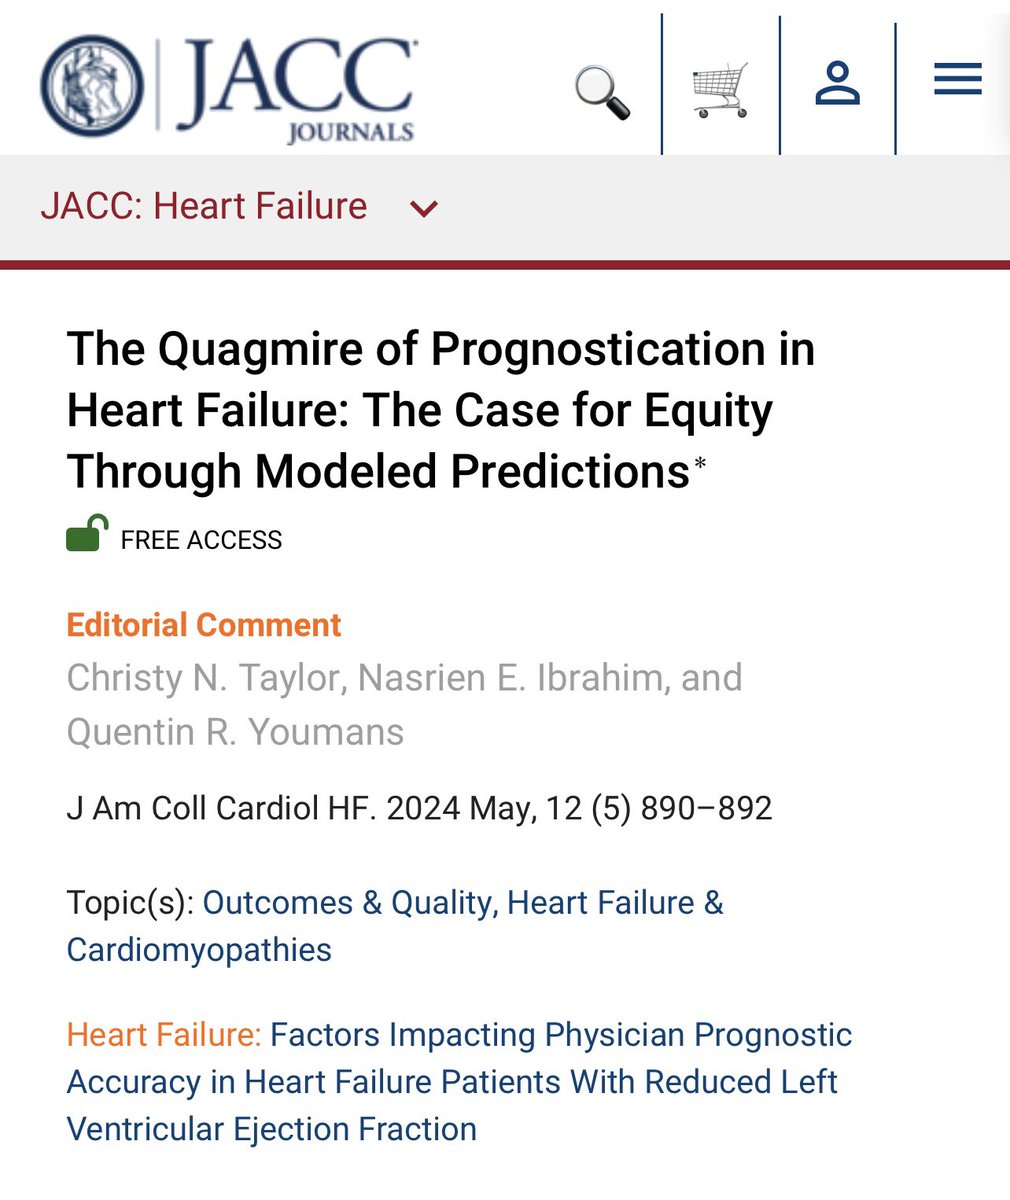 Humans are challenged by predictive judgements, yet we often use prognostication to counsel patients. Led by ⭐️ fellow Dr. Christy Taylor in @JACCJournals, we offer an editorial on a great study on physician prognostication and tools to aid. @DrNasrien tinyurl.com/yfjxhu5h